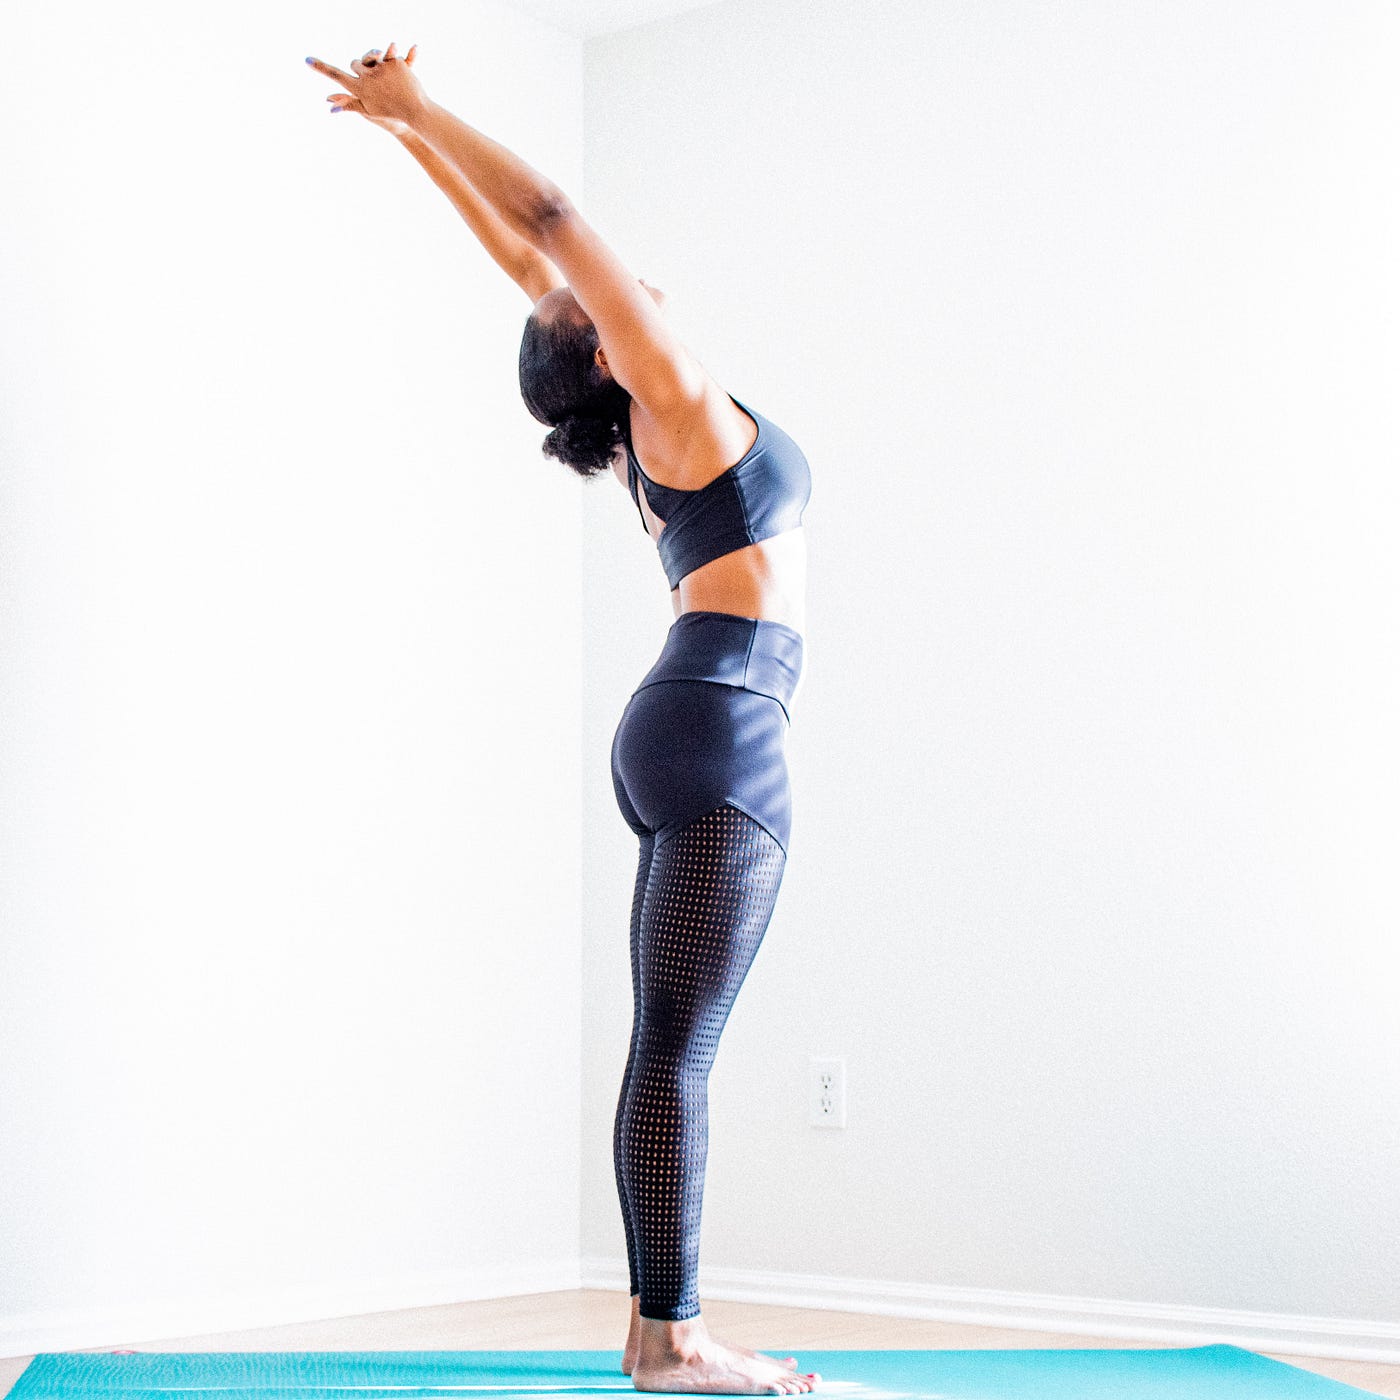 Stand Tall: Yoga for Posture. Embrace “Stand Tall: Yoga for